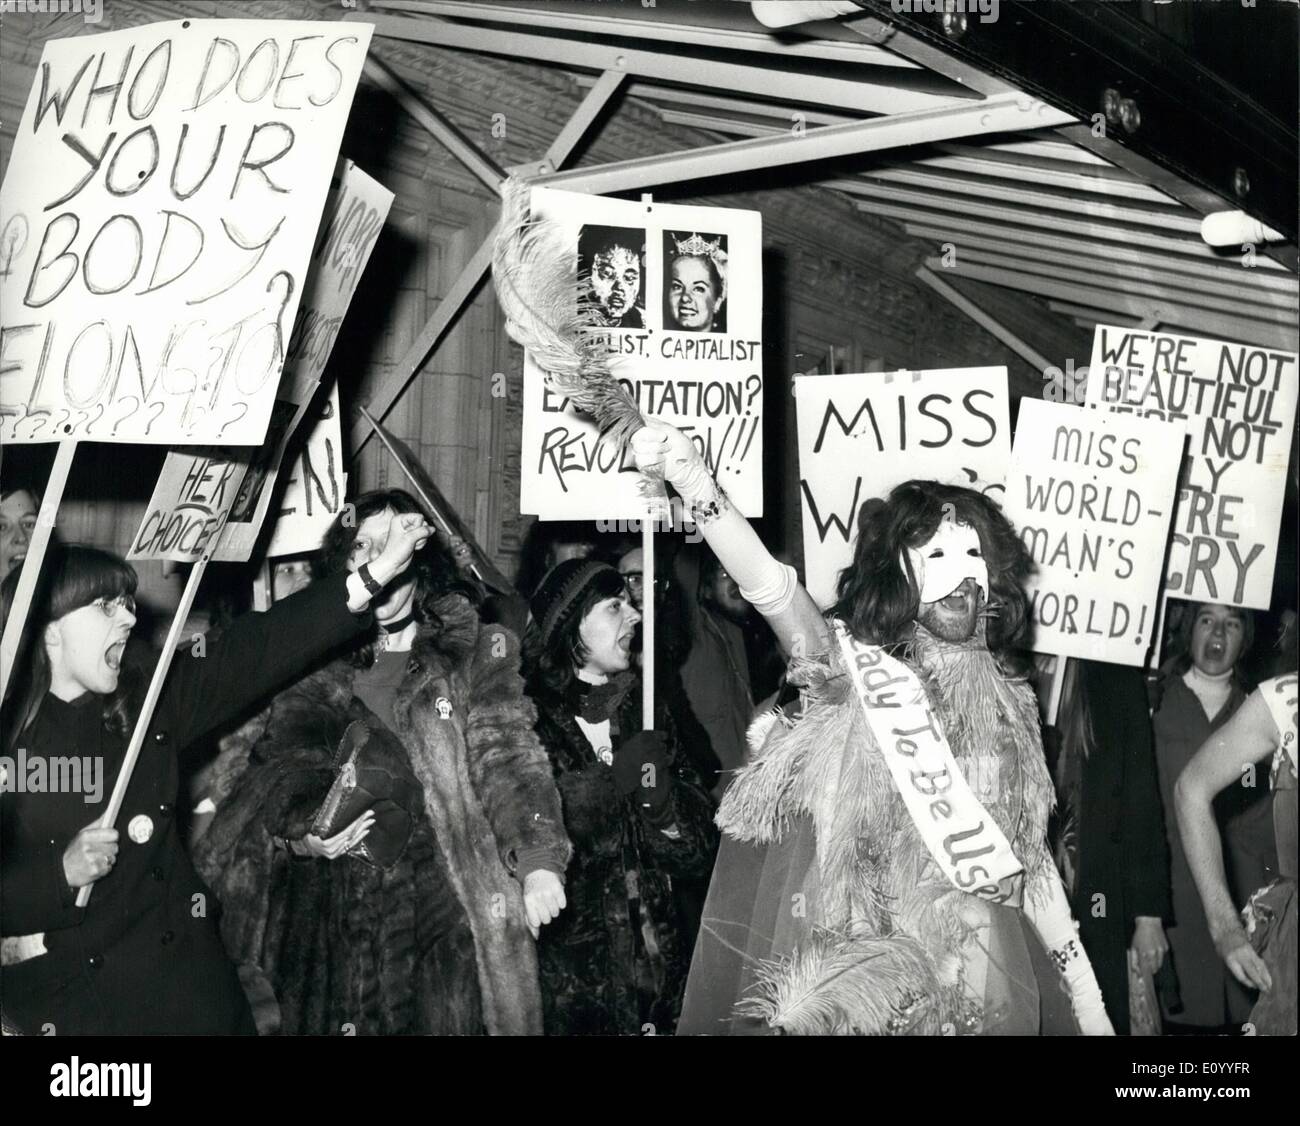 Nov. 11, 1971 - Women's Liberation Movement Demonstrate Outside The Albert Hall Over The ''Miss World Contest'': Members of Britain's Liberation movement held a demonstration outside the Royal Albert Hall in London this where the ''Miss World'' Contest was being held, which was won by 22 year old Miss Lucia Petterie, of Brazil. Photo shows Members of Women's Lib' seen outside the Royal Albert Hall in London with their banners. Stock Photo